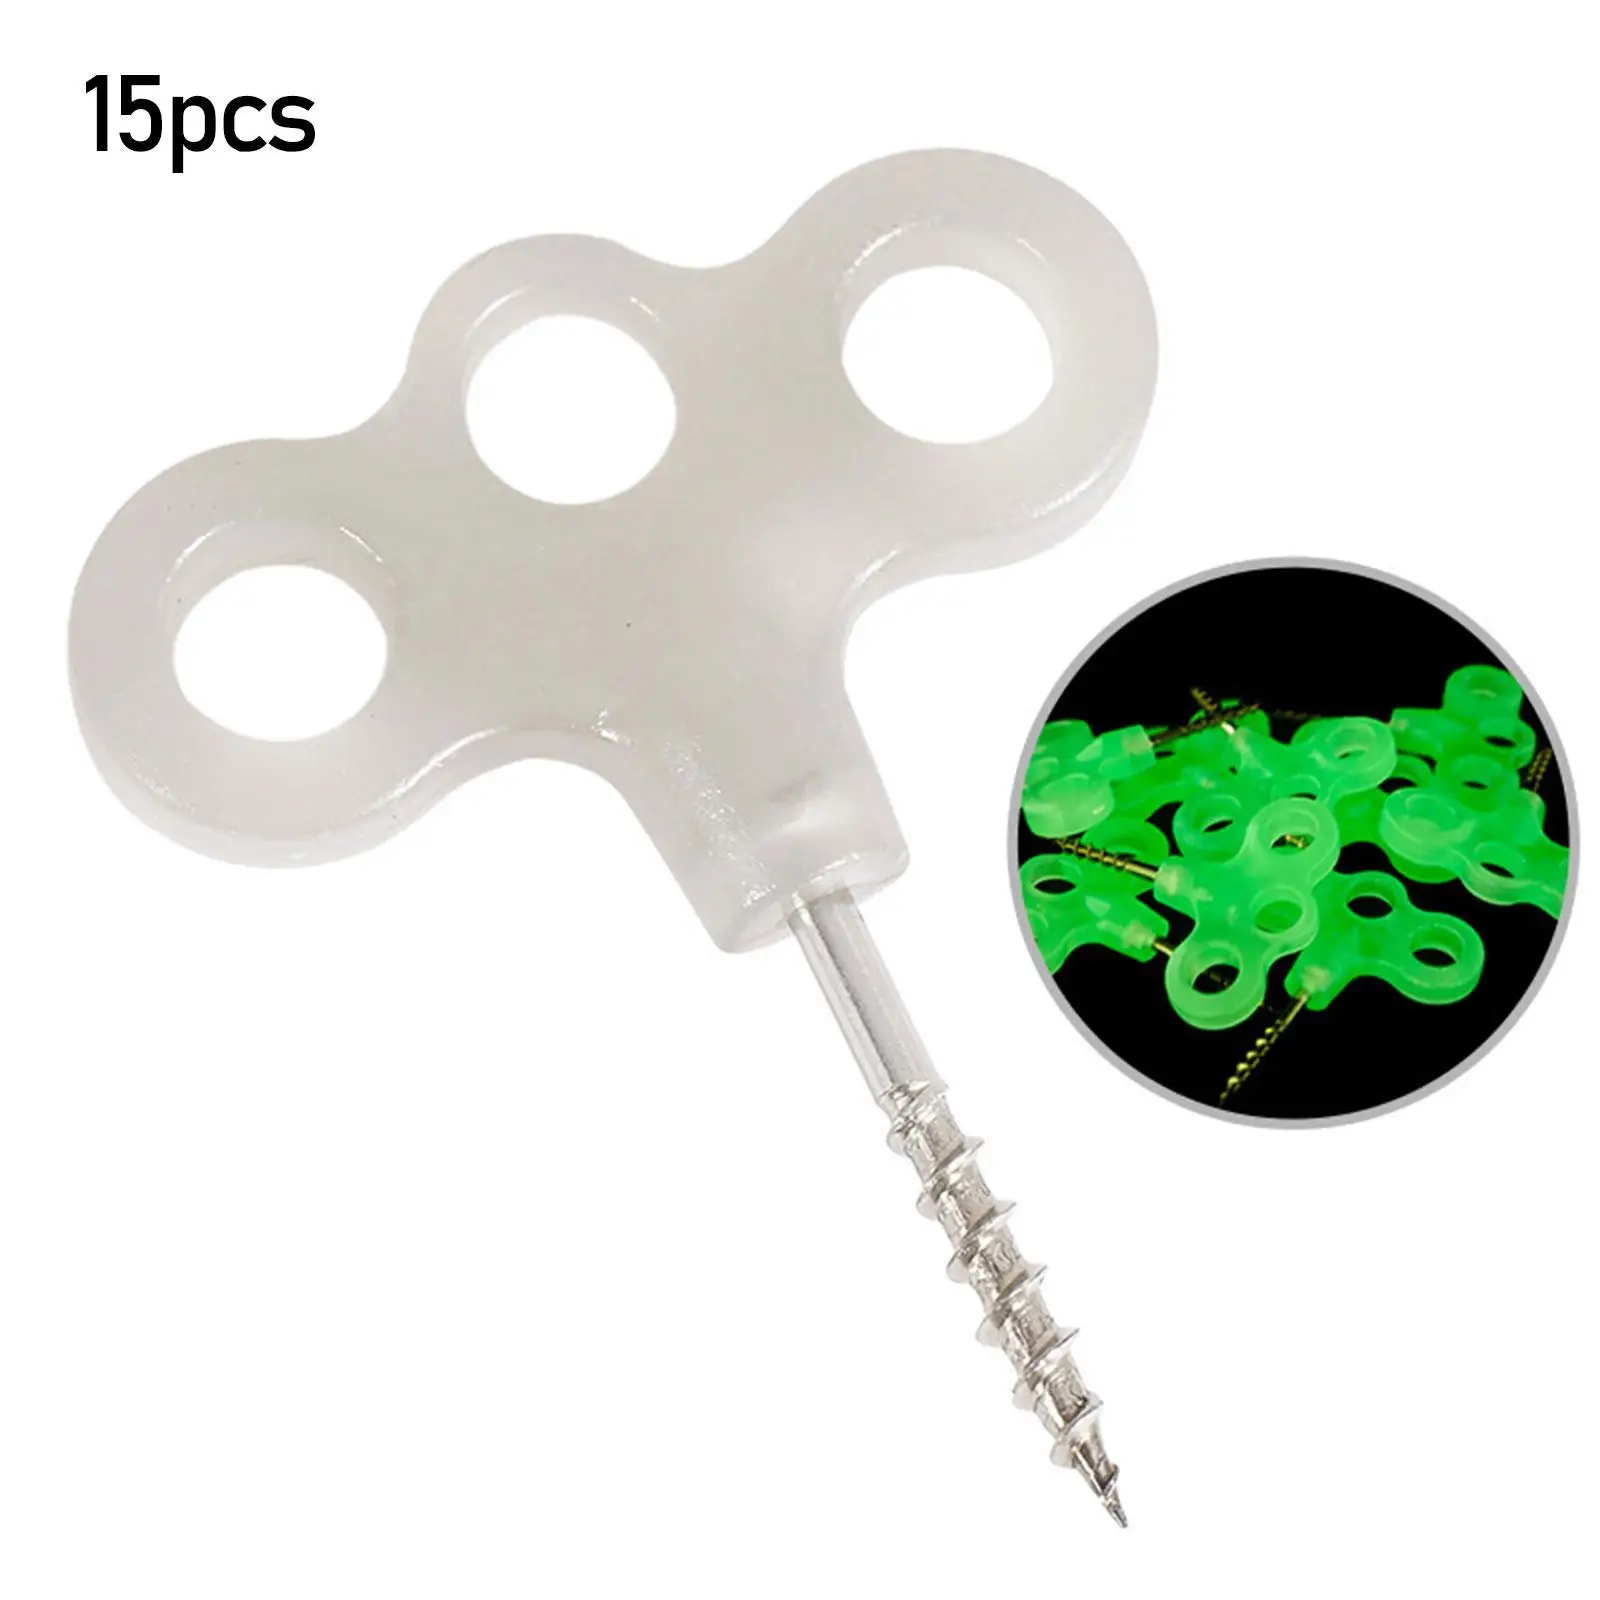 Three Hook Threaded Nail Luminous Multipurpose Deck Nails for Trip Backpacking Equipment